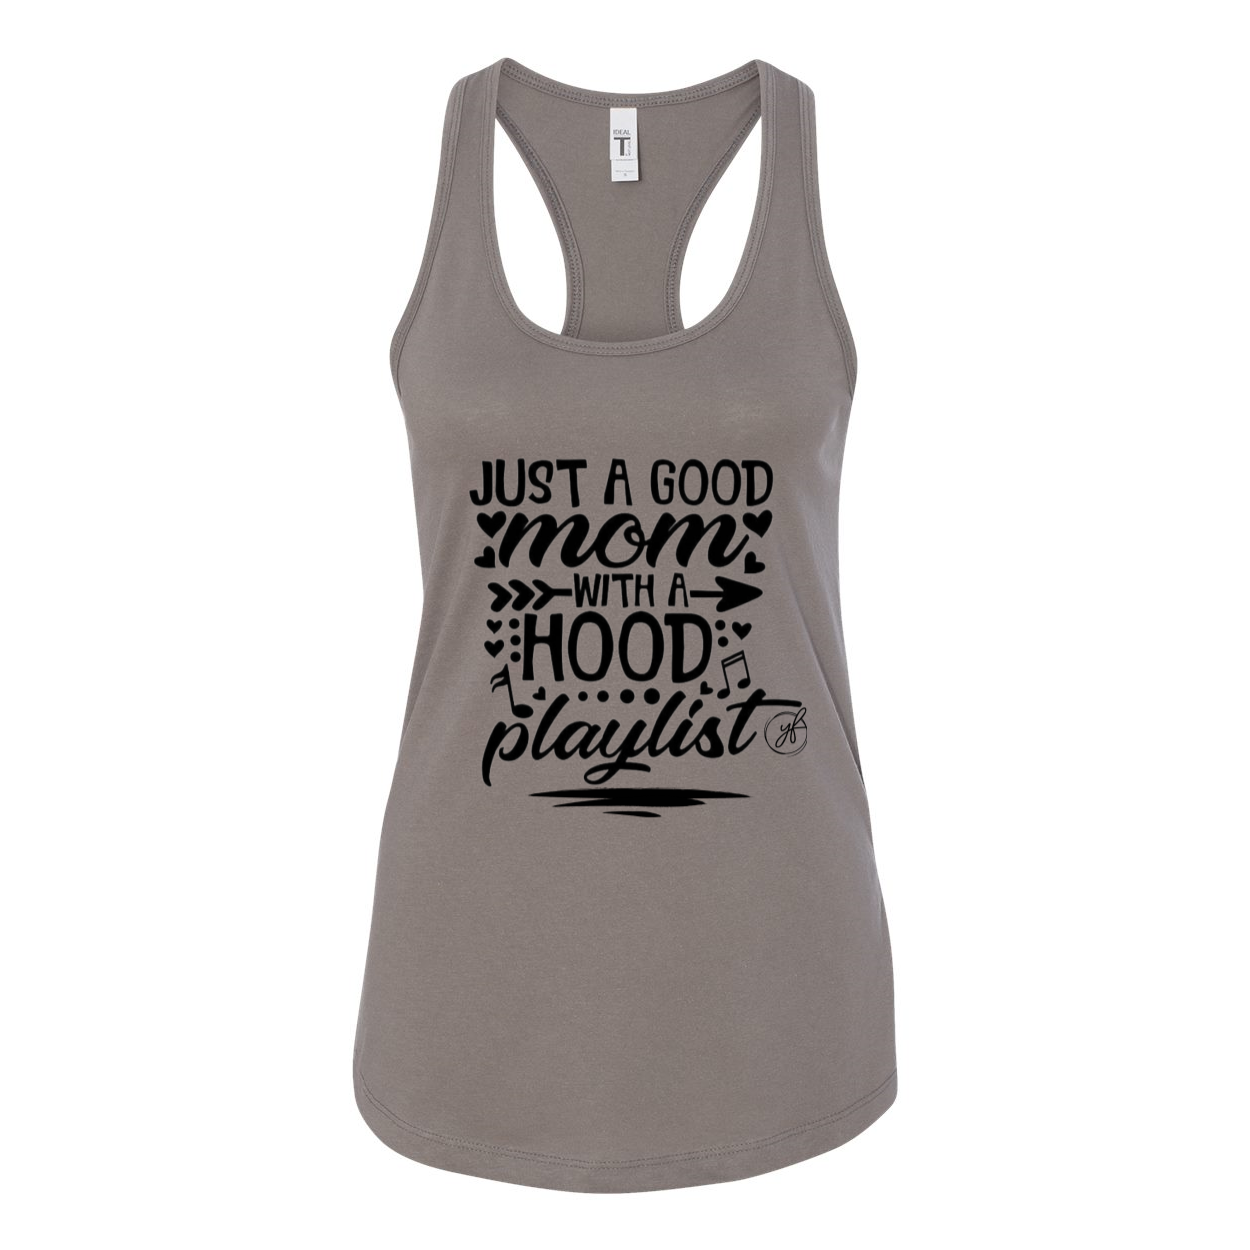 YOLO FITTED'S "JUST A GOOD MOM...."  WOMEN'S RACER BACK TANK - Yolofitted